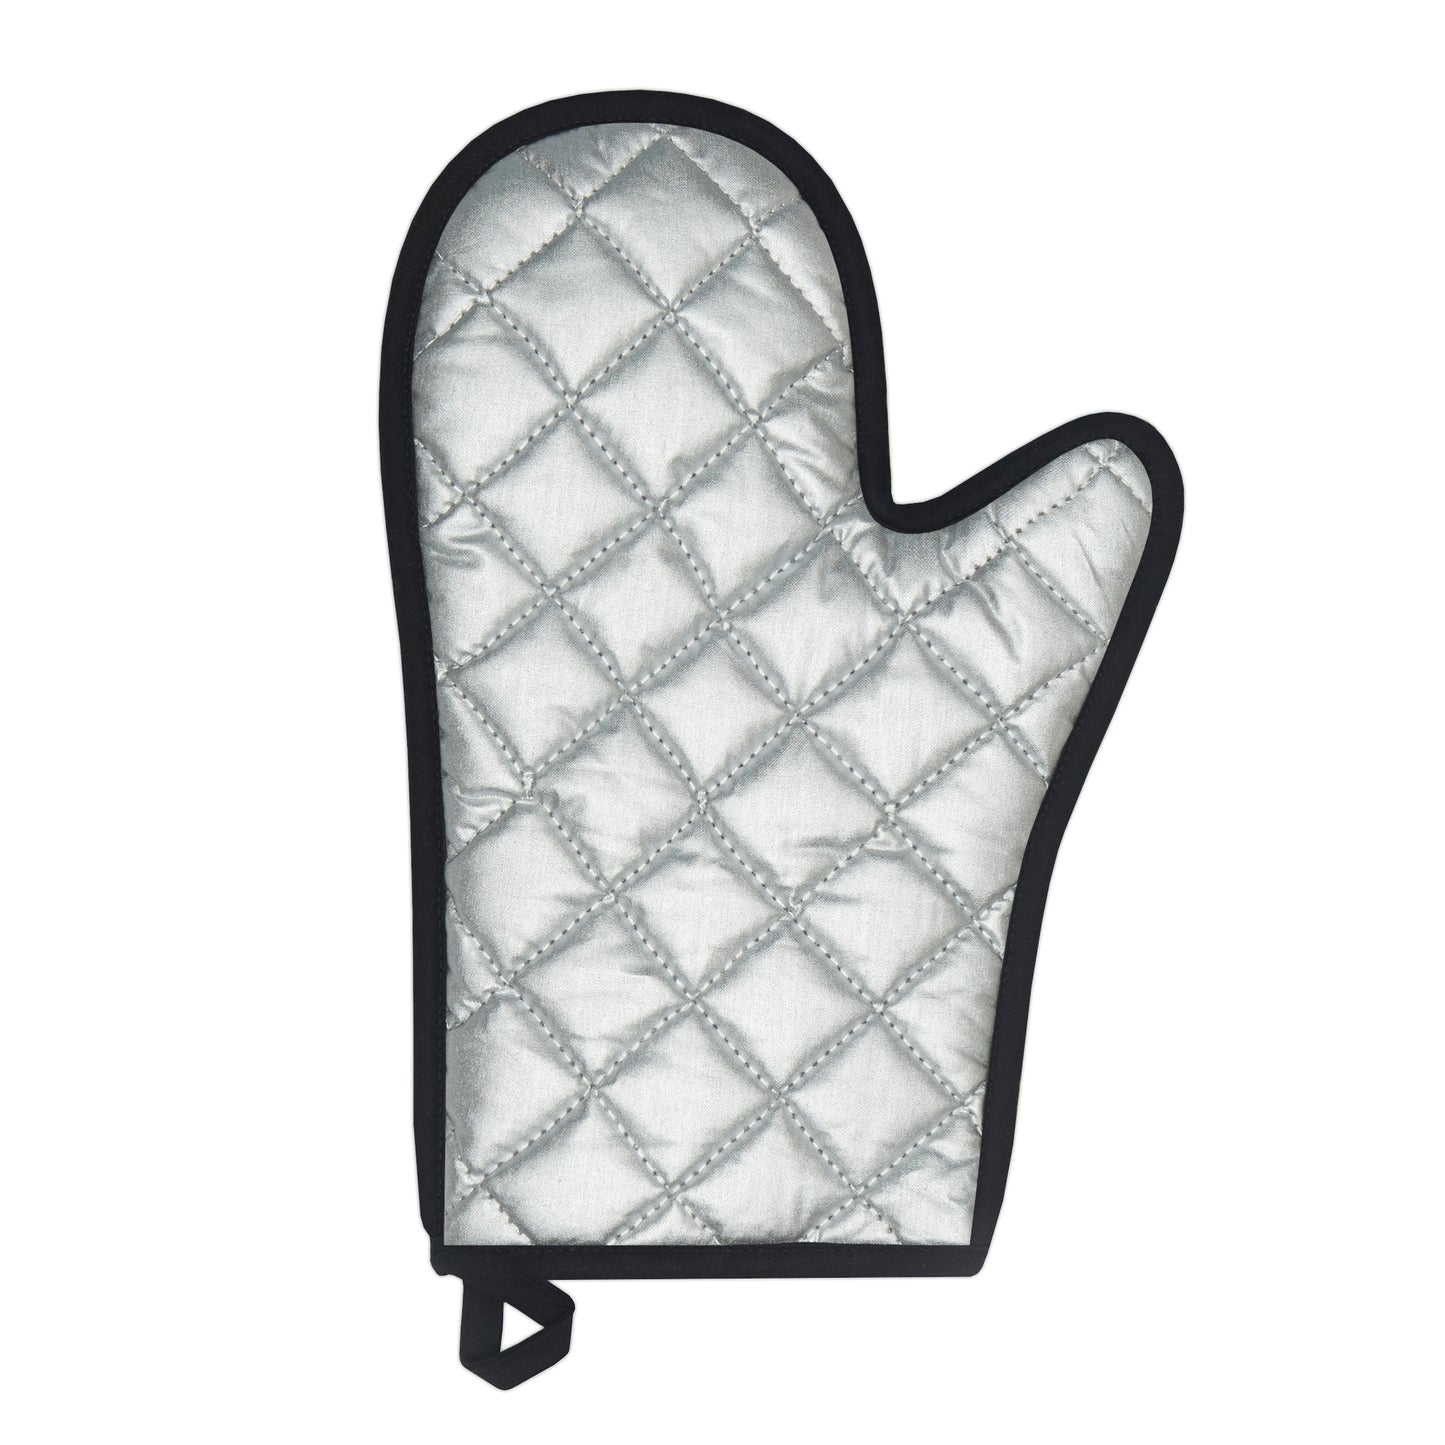 SiStained8 Oven Glove